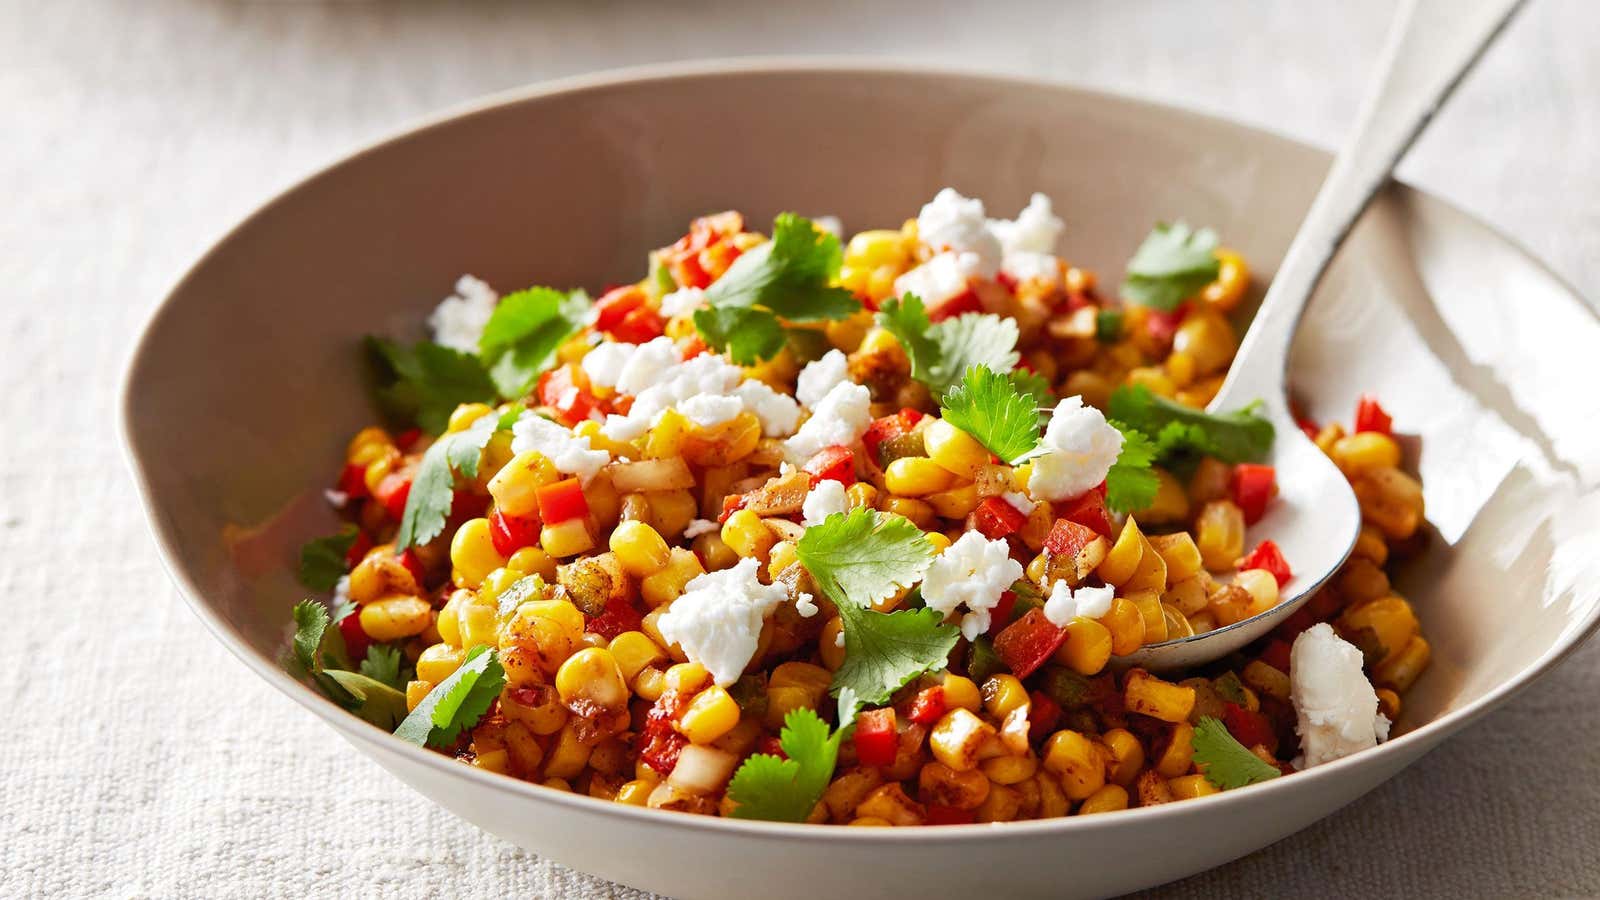 Urvashi Pitre’s roasted corn salad, straight from the air fryer.